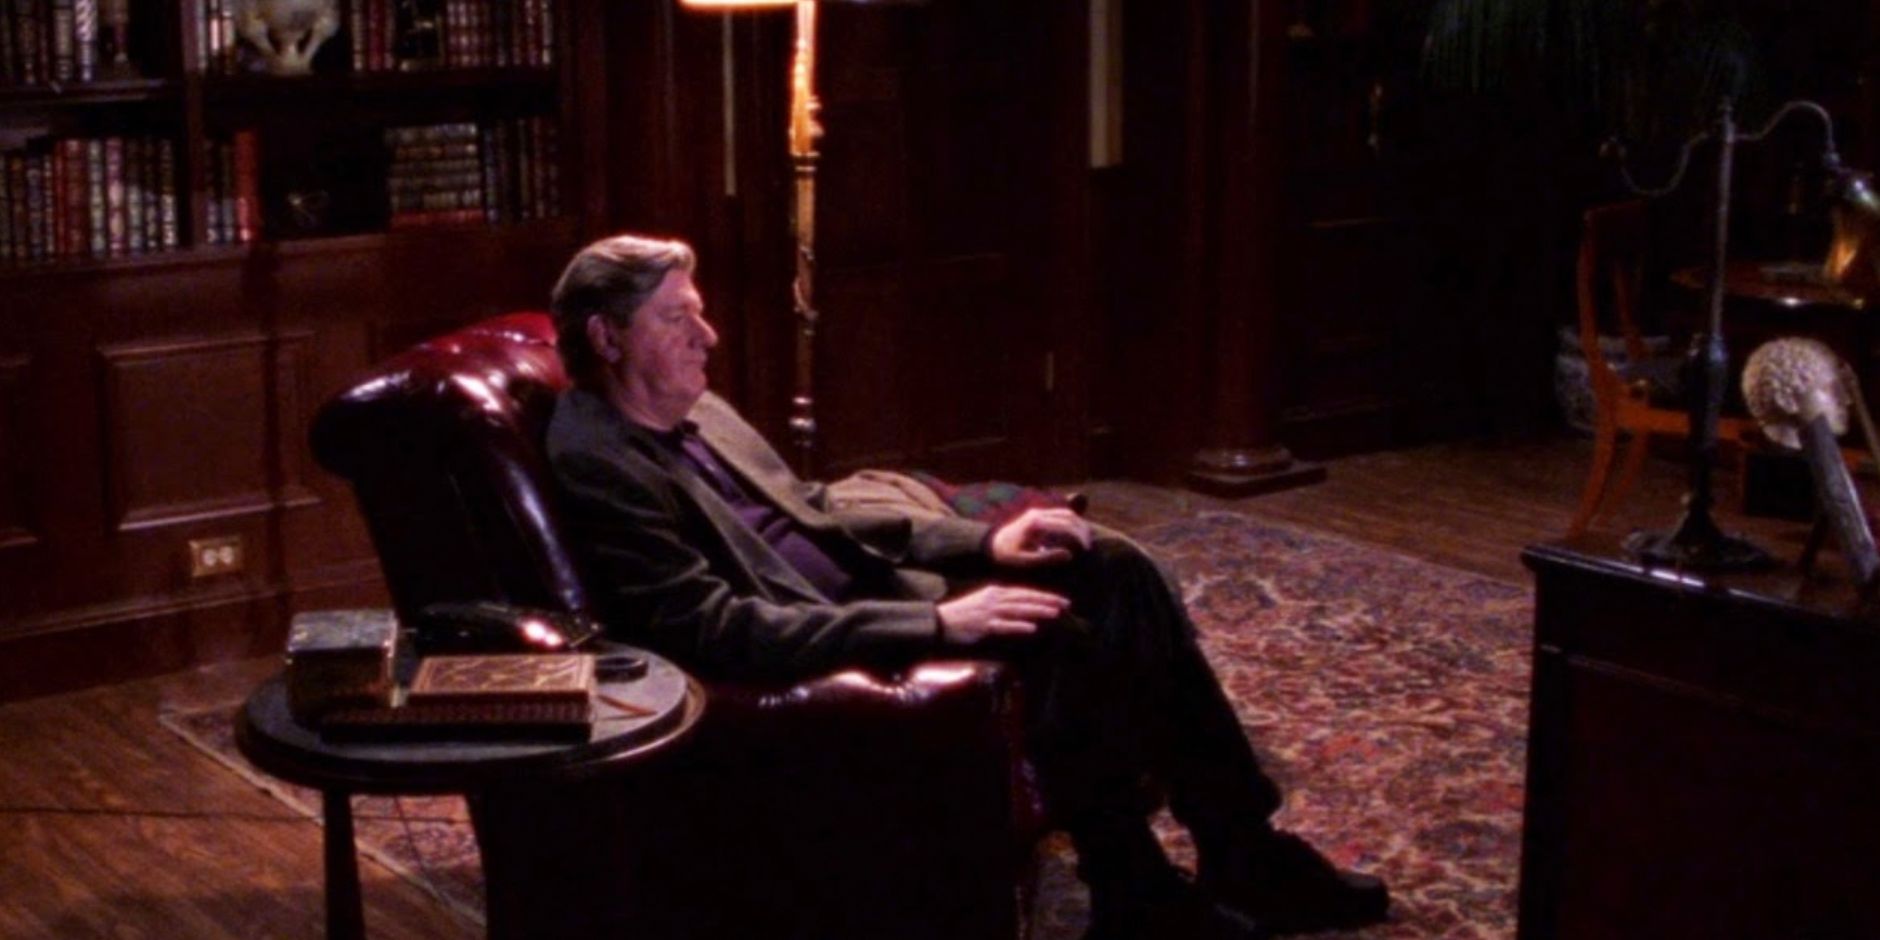 Richard sitting alone in his study in Gilmore Girls